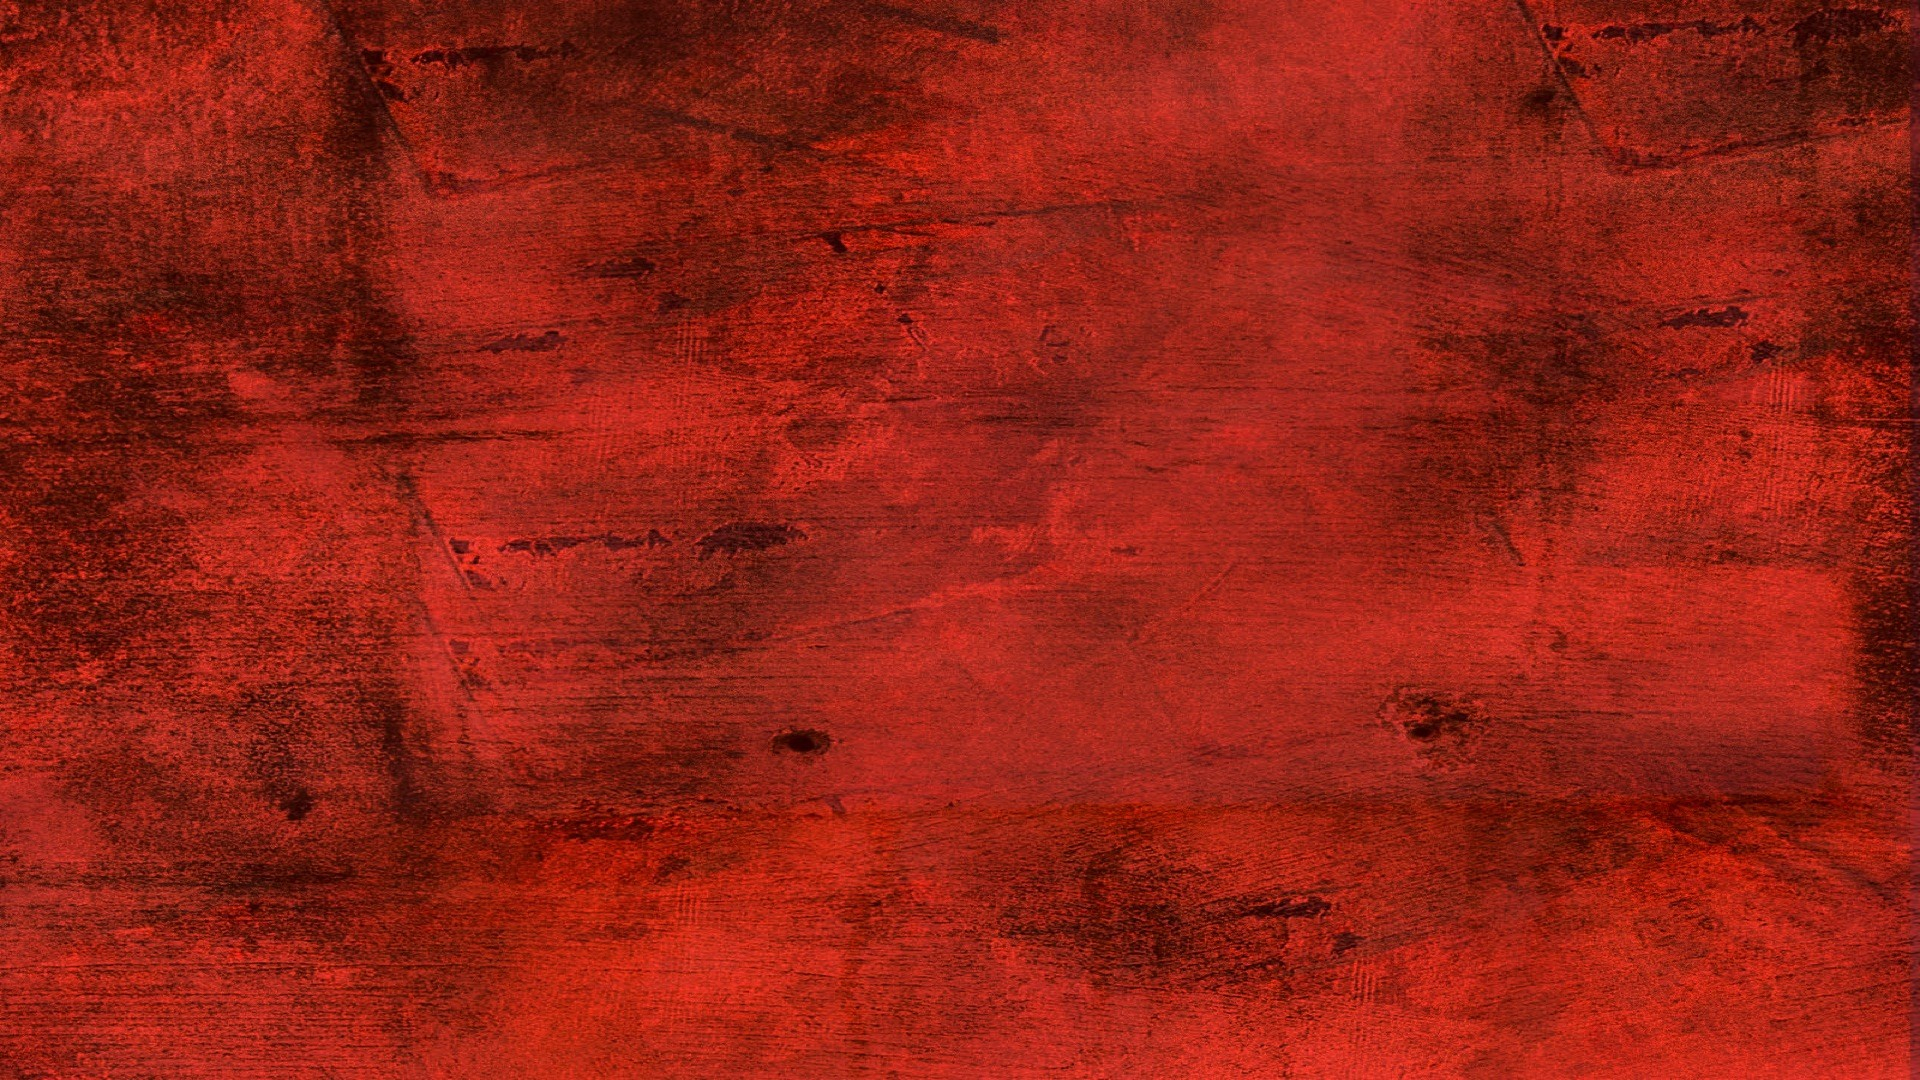 1920x1080 Red Grunge Backgrounds, Free Red Grungy Background SlideBackground